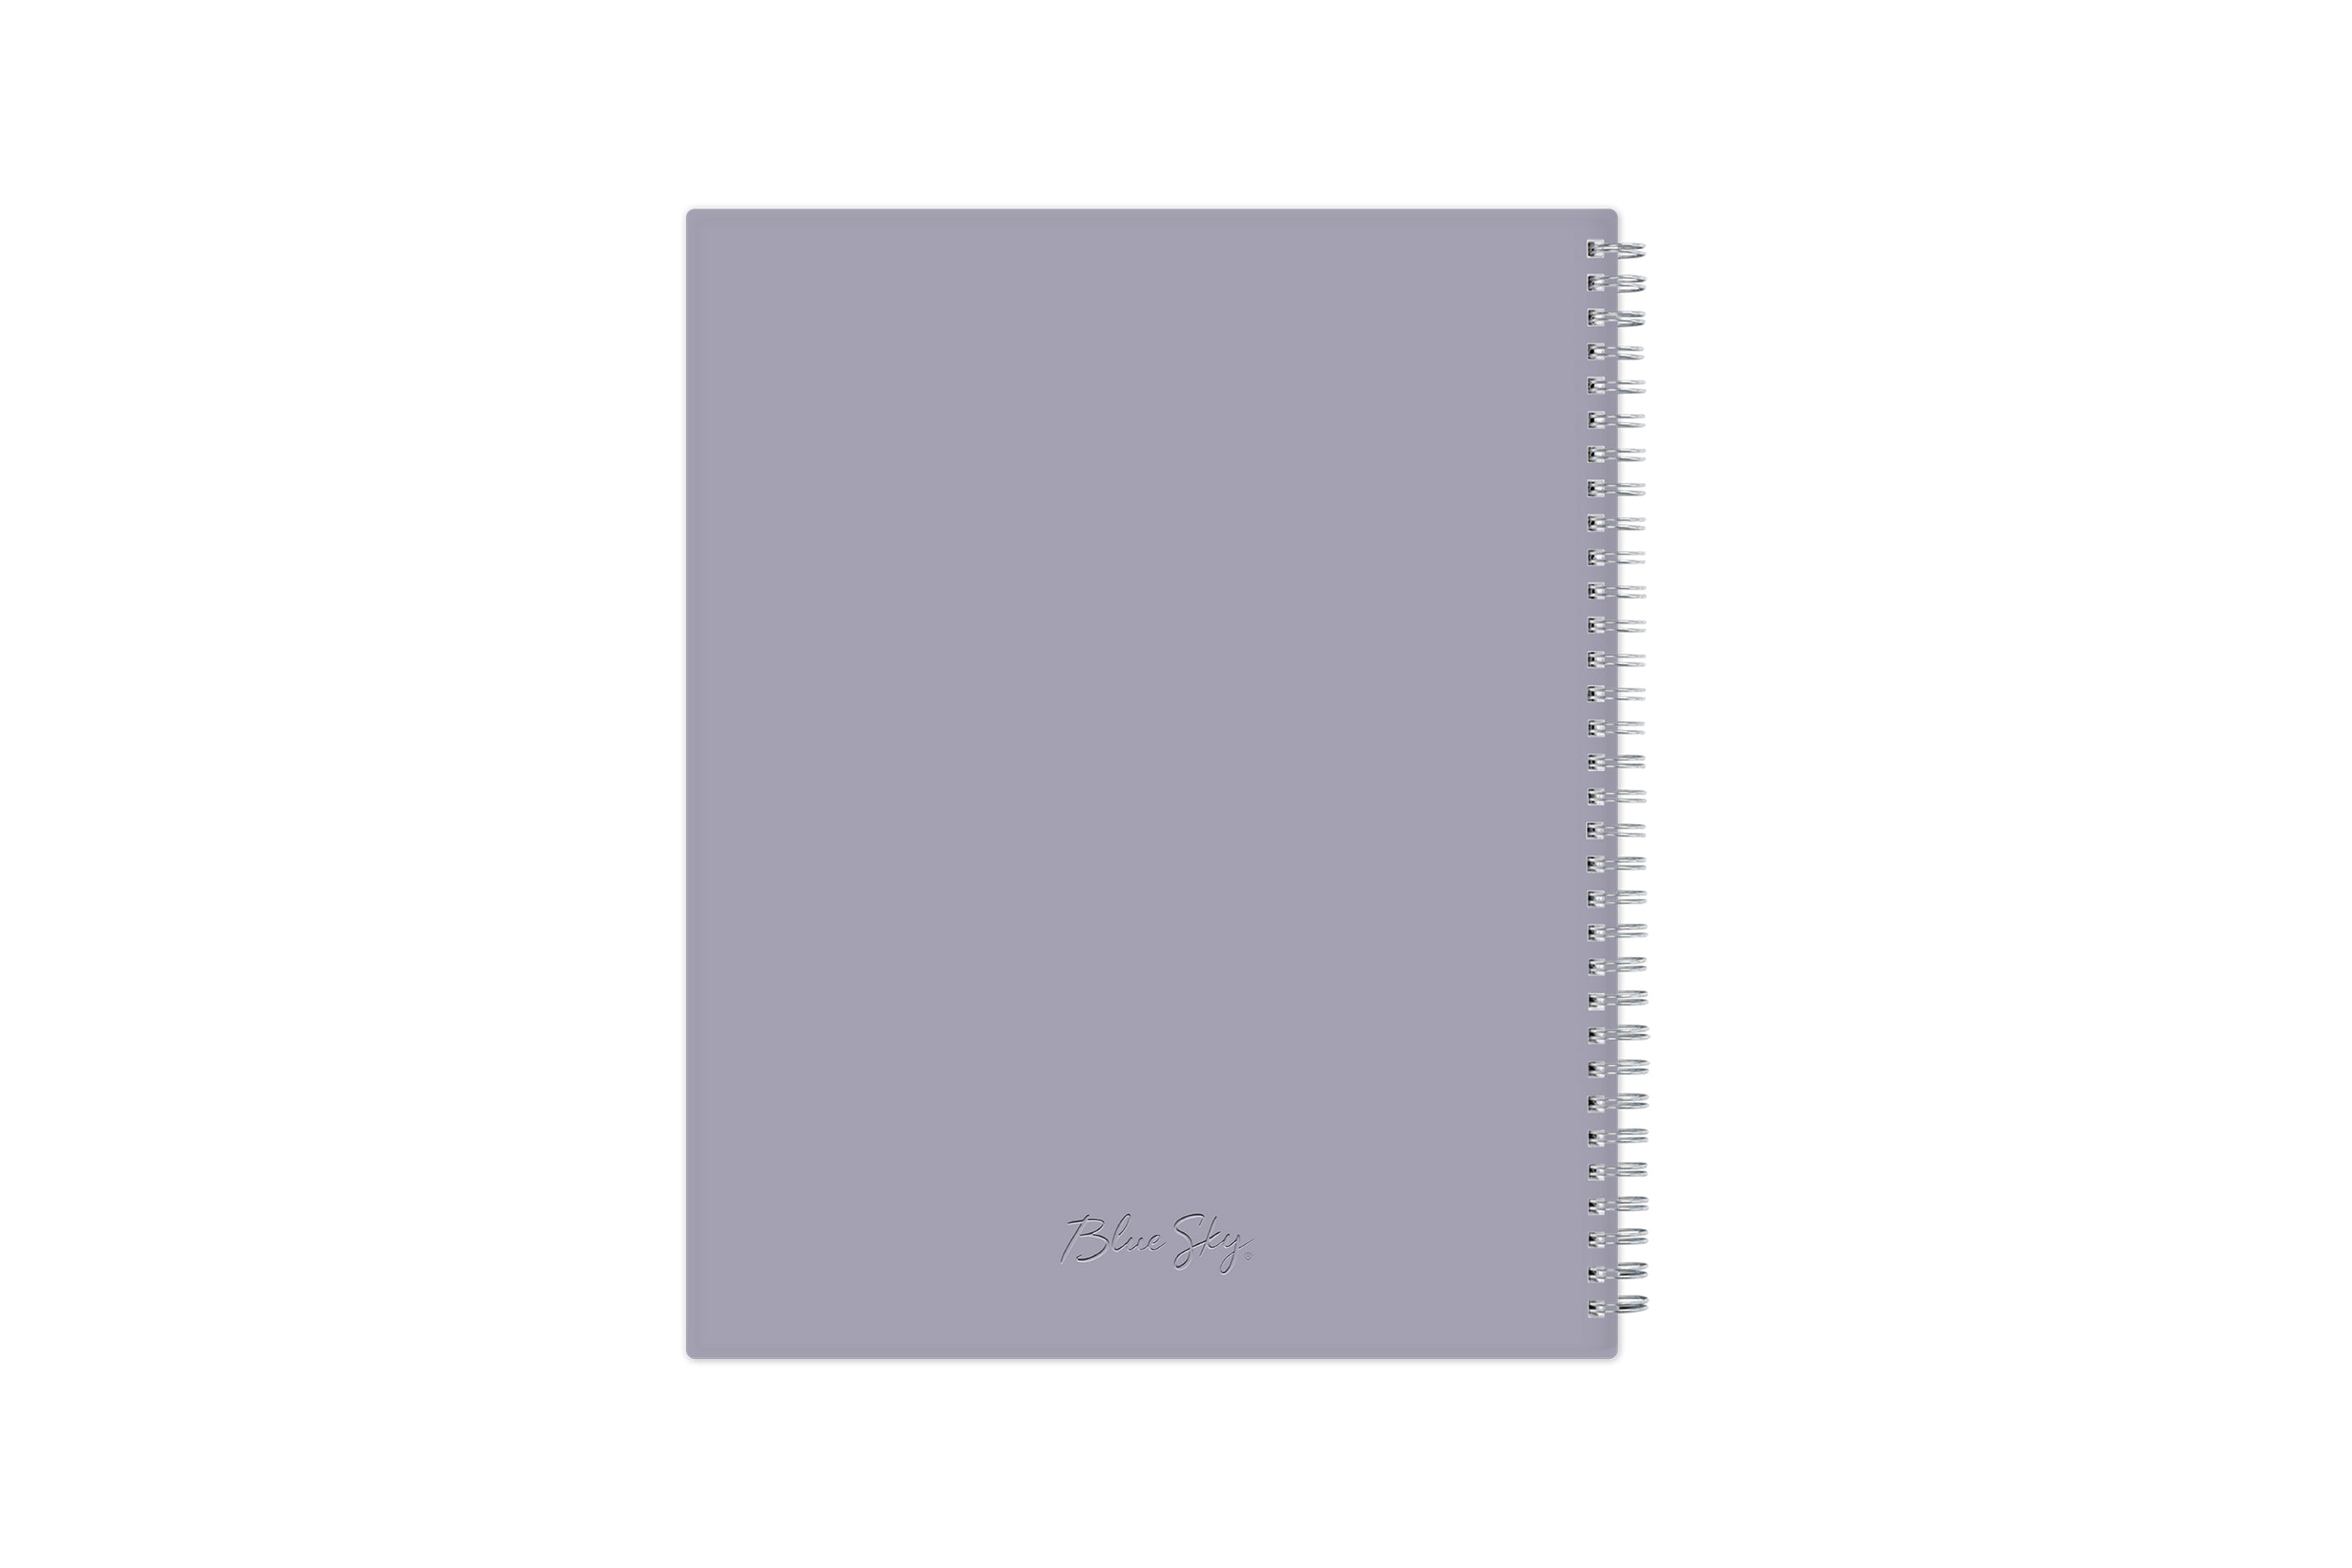 January 2023 to December 2023 weekly planner featuring a solid flexible light purple back cover, silver twin wire-o, and a compact 8.5x11 size planner